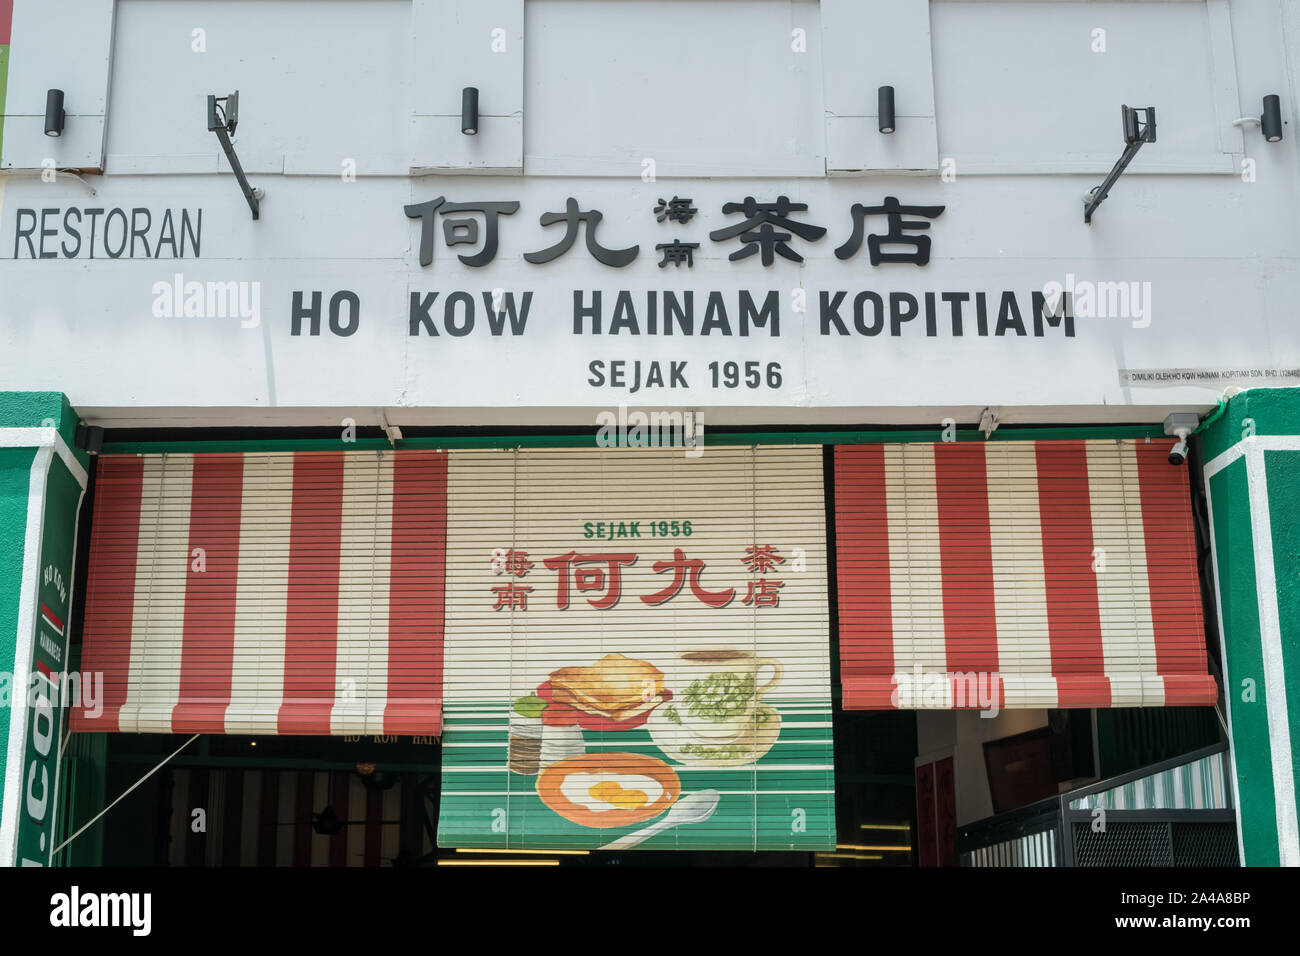 Kuala Lumpur,Malaysia - October 9,2019 : Ho Kow Hainam Kopitiam is a decades old traditional Hainanese coffee shop which is located nearby the Petalin Stock Photo